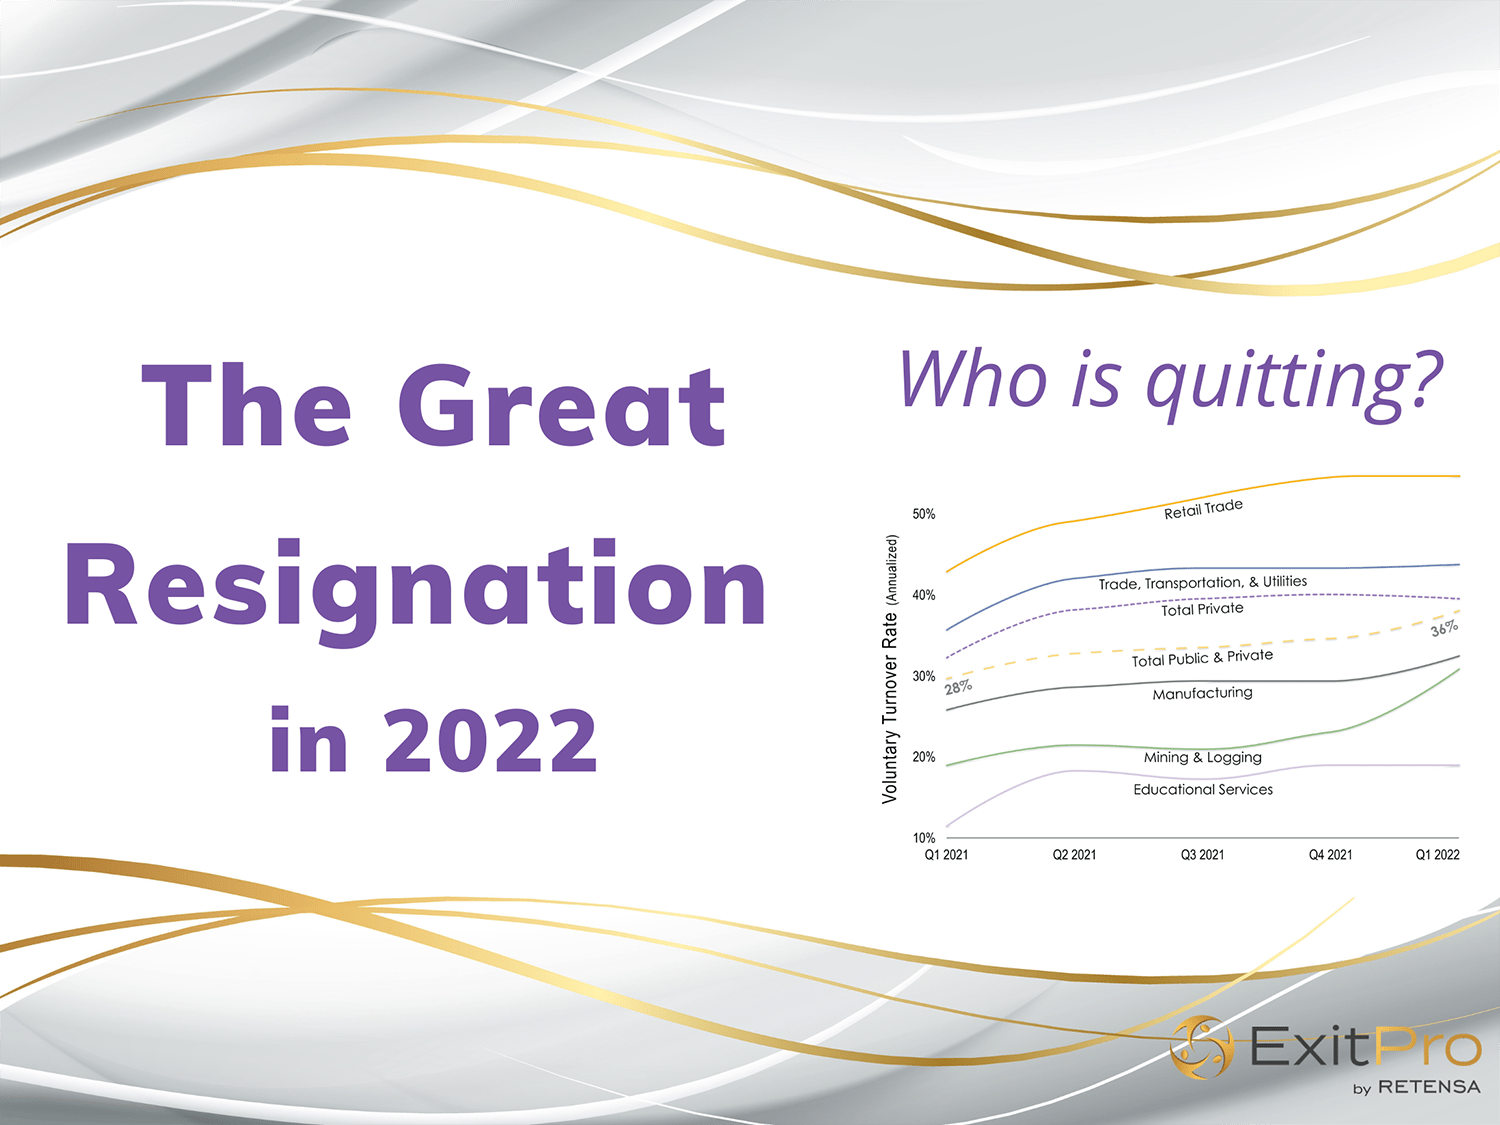 Great Resignation Infographic Part 2: “Who is quitting?"